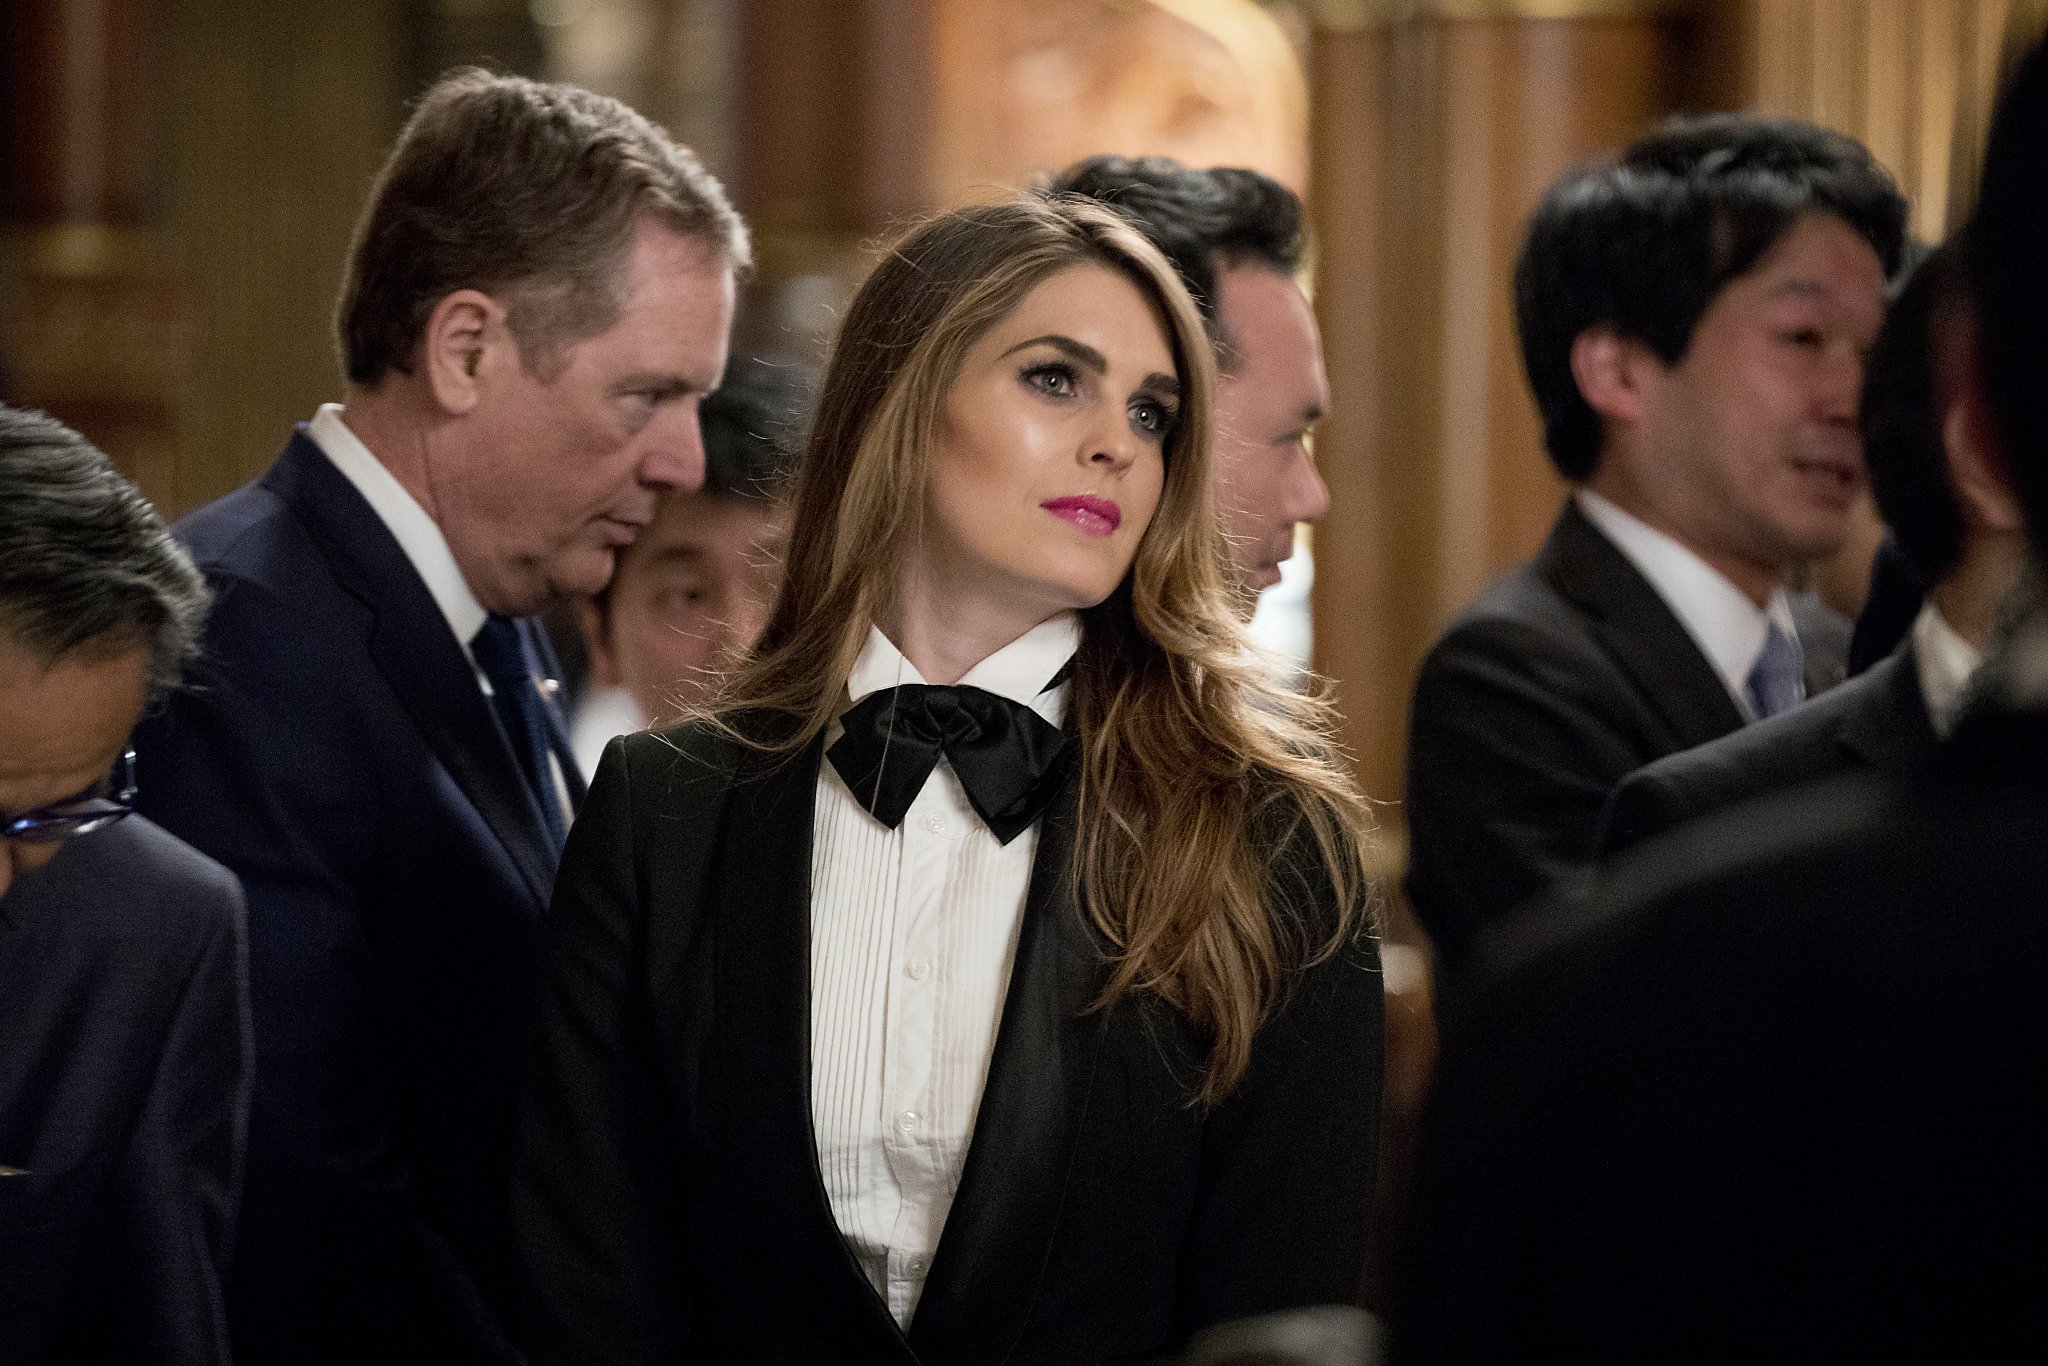 Trump reportedly said Hope Hicks 'had about as much experience as a coffee cup' in ...2048 x 1366